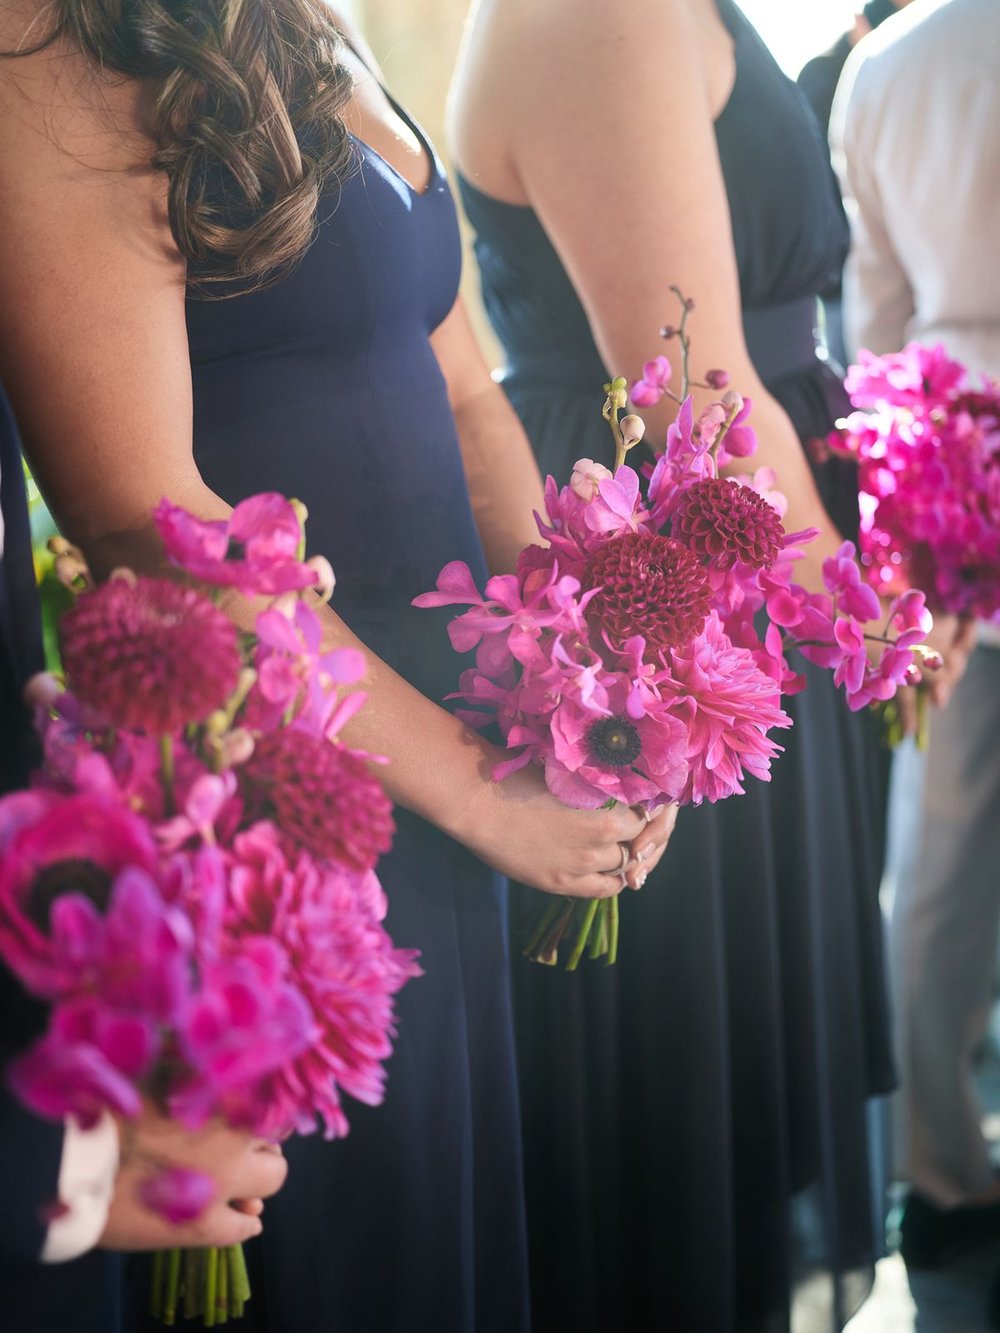 wedding-bouquet-with-hot-pink-flowers-navy-dresses.jpg